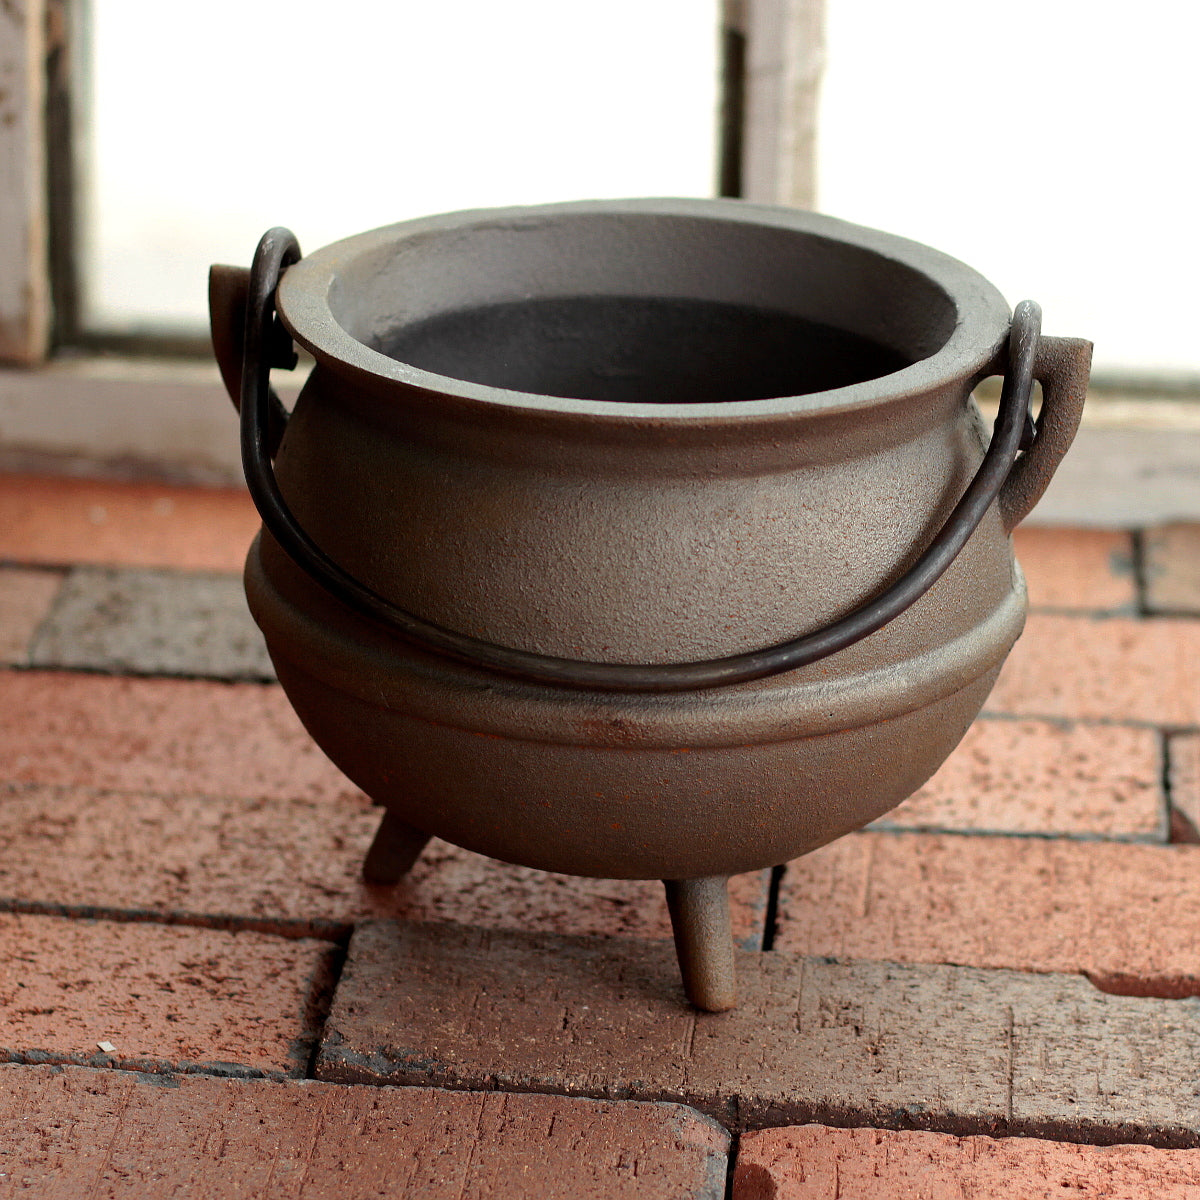 Cast Iron Cooking Pots, Set of 2 for sale at Pamono